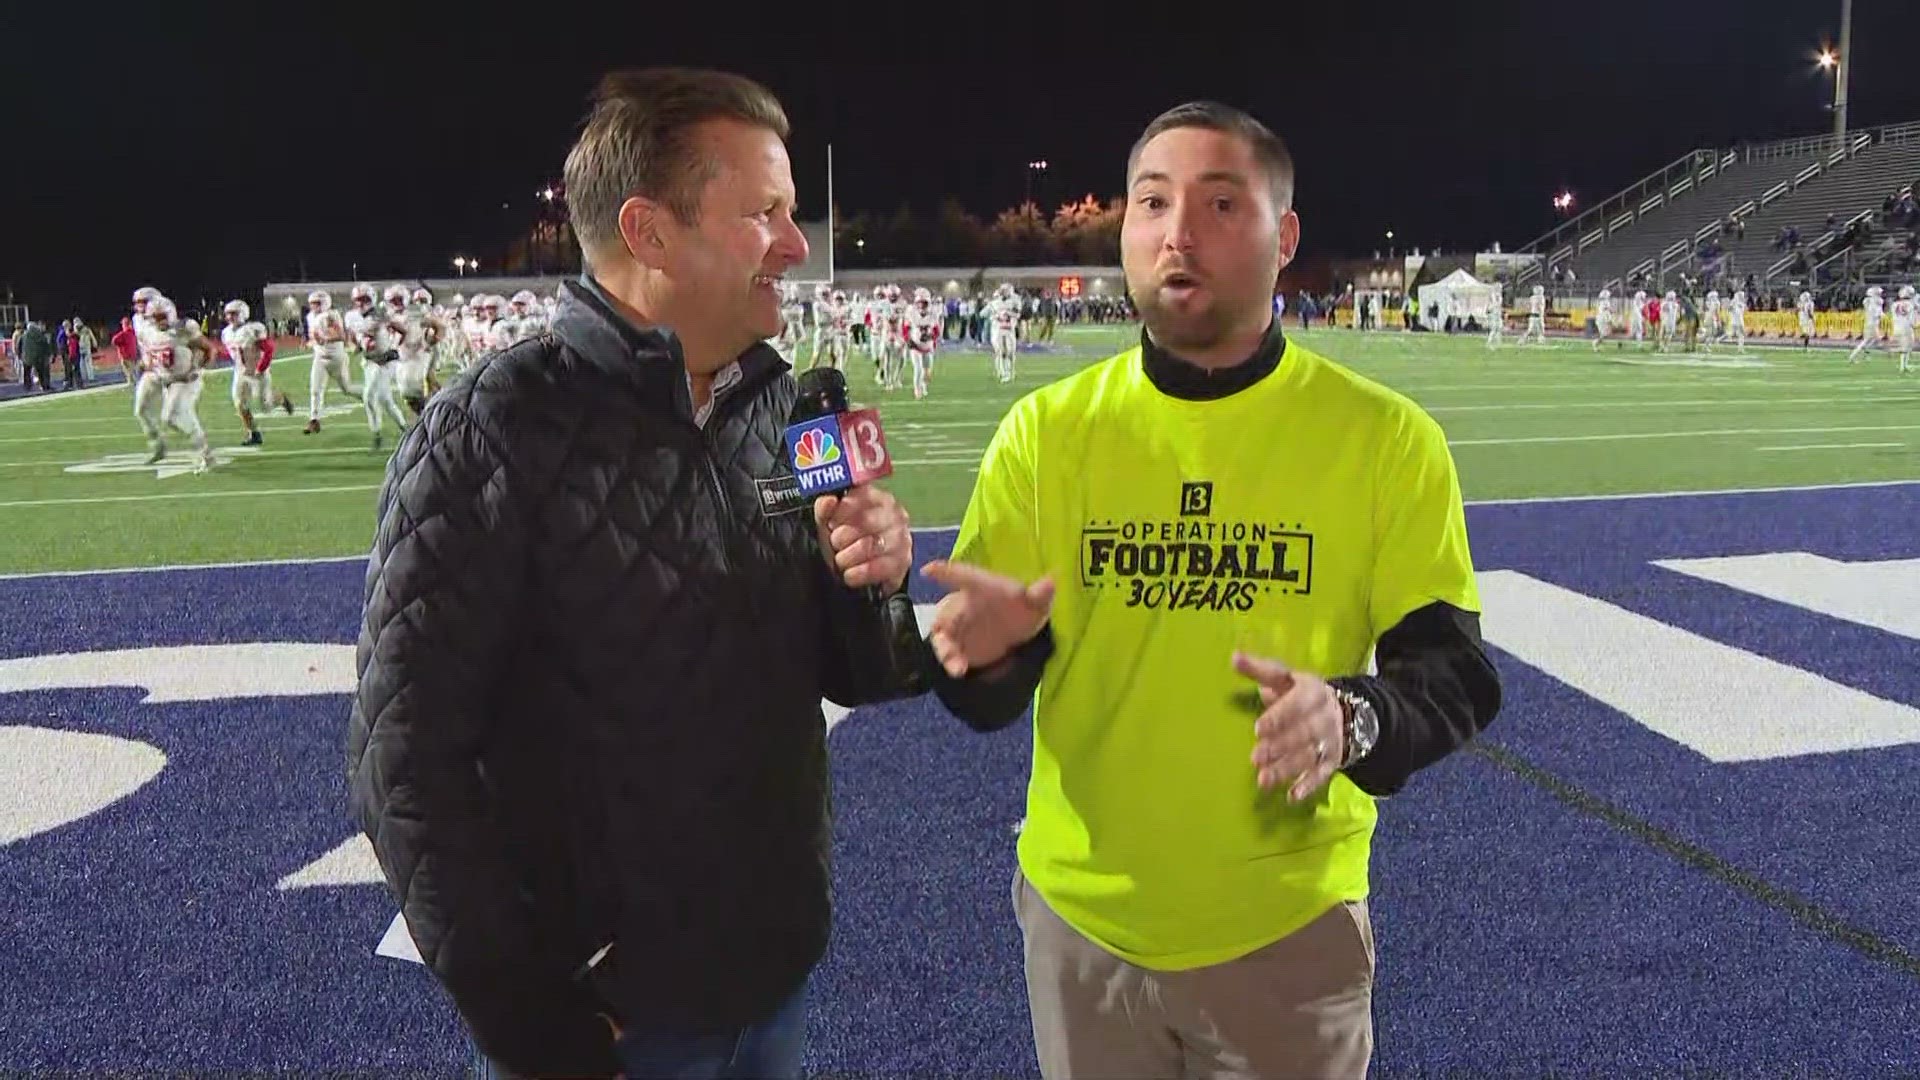 13Sports director Dave Calabro and 13Sports reporter Dominic Miranda report from Ben Davis ahead of the IHSAA Class 6A semi-state championship game.